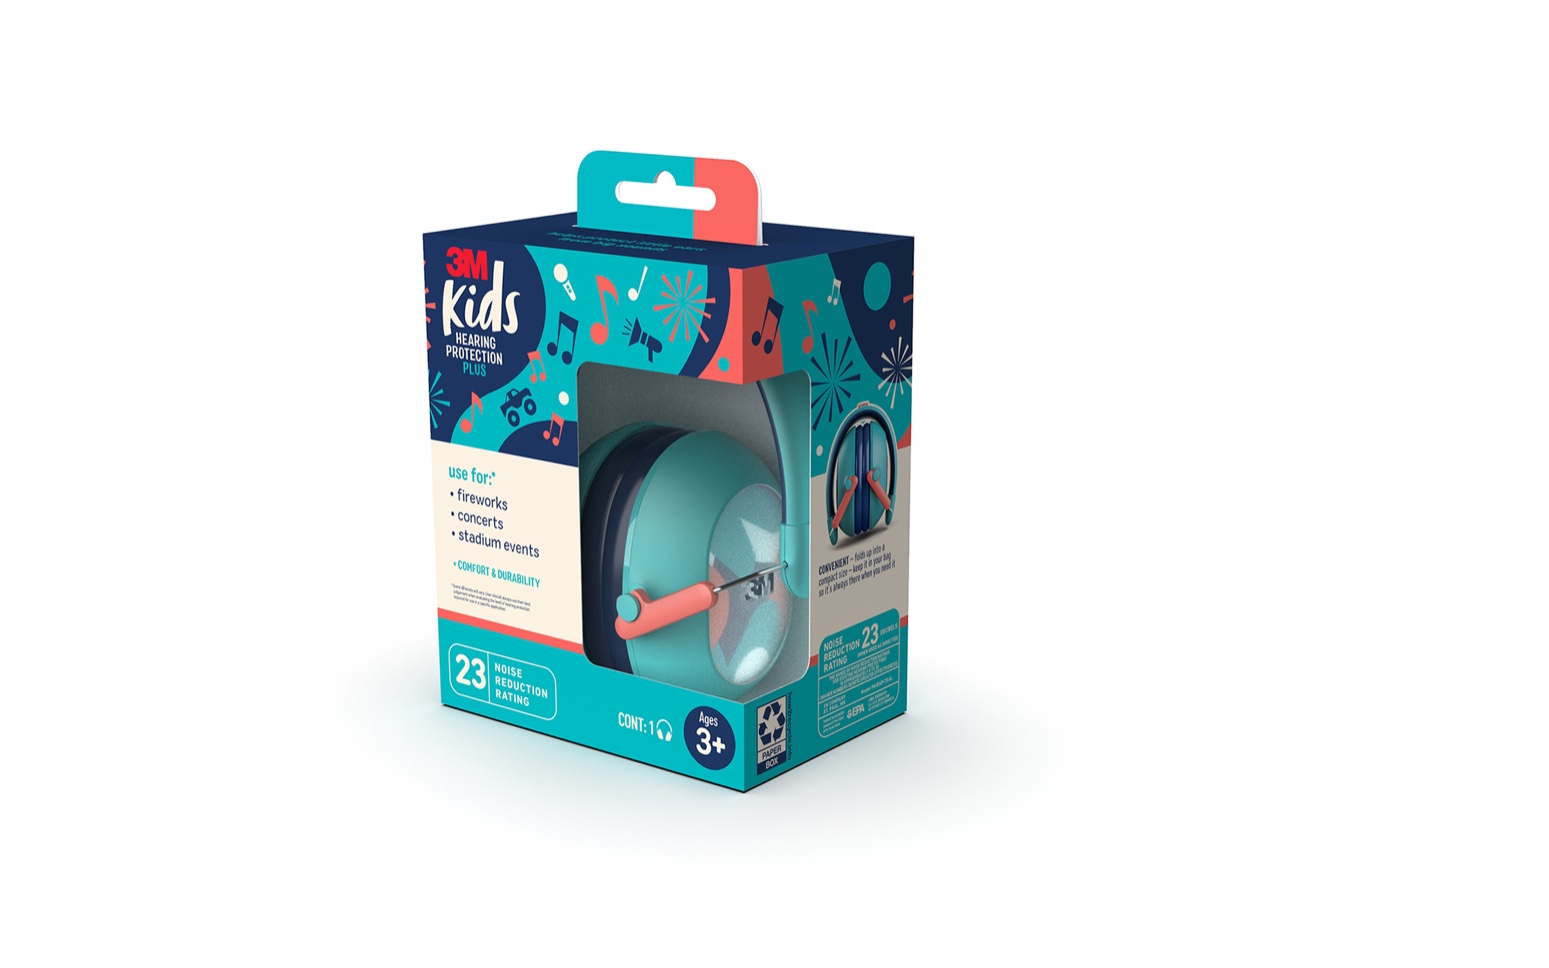 3M Creates Packaging for Both Kids and Parents With Hearing Protection in Mind